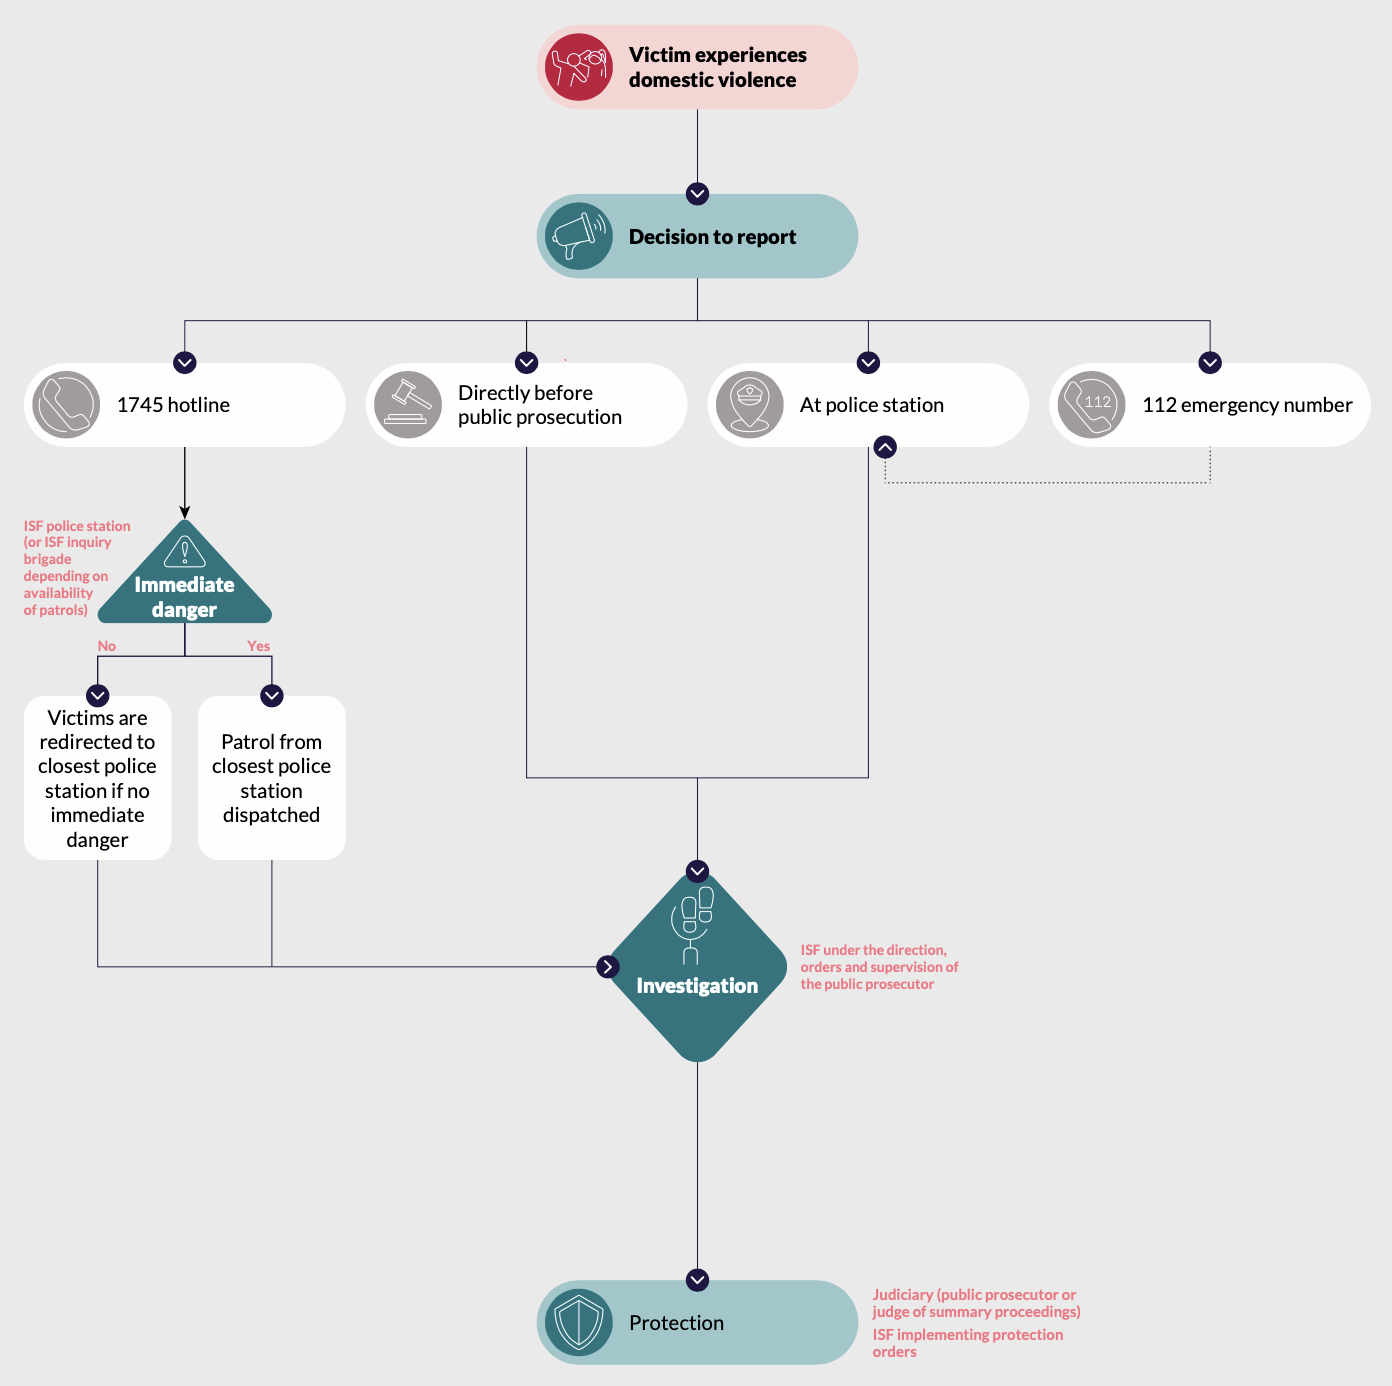 Responding to domestic violence in Lebanon - an overview of the process flow